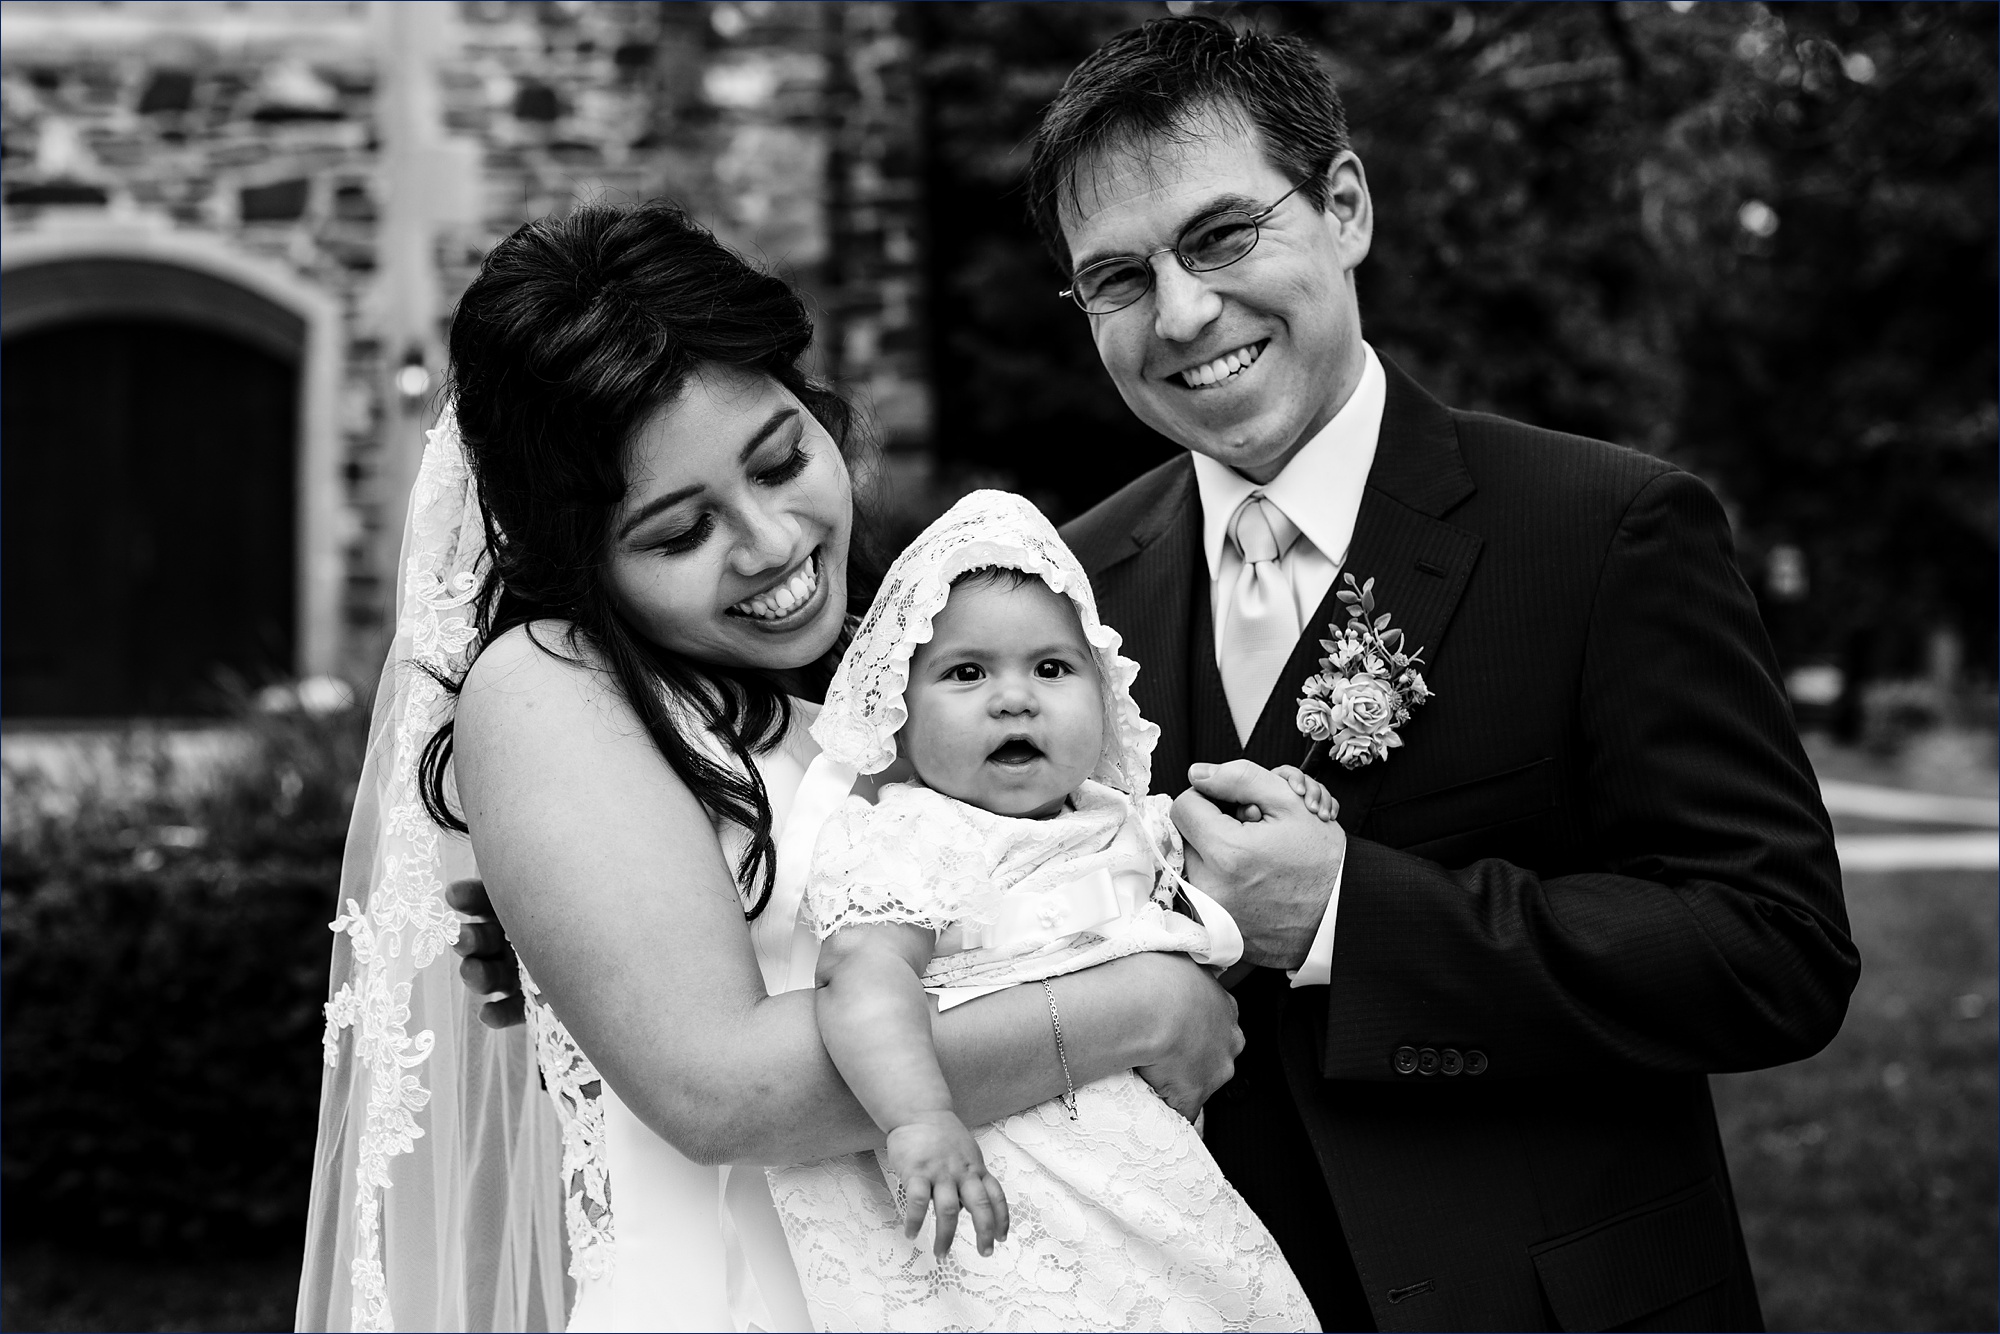 The newlyweds and their daughter after their Dartmouth NH wedding ceremony